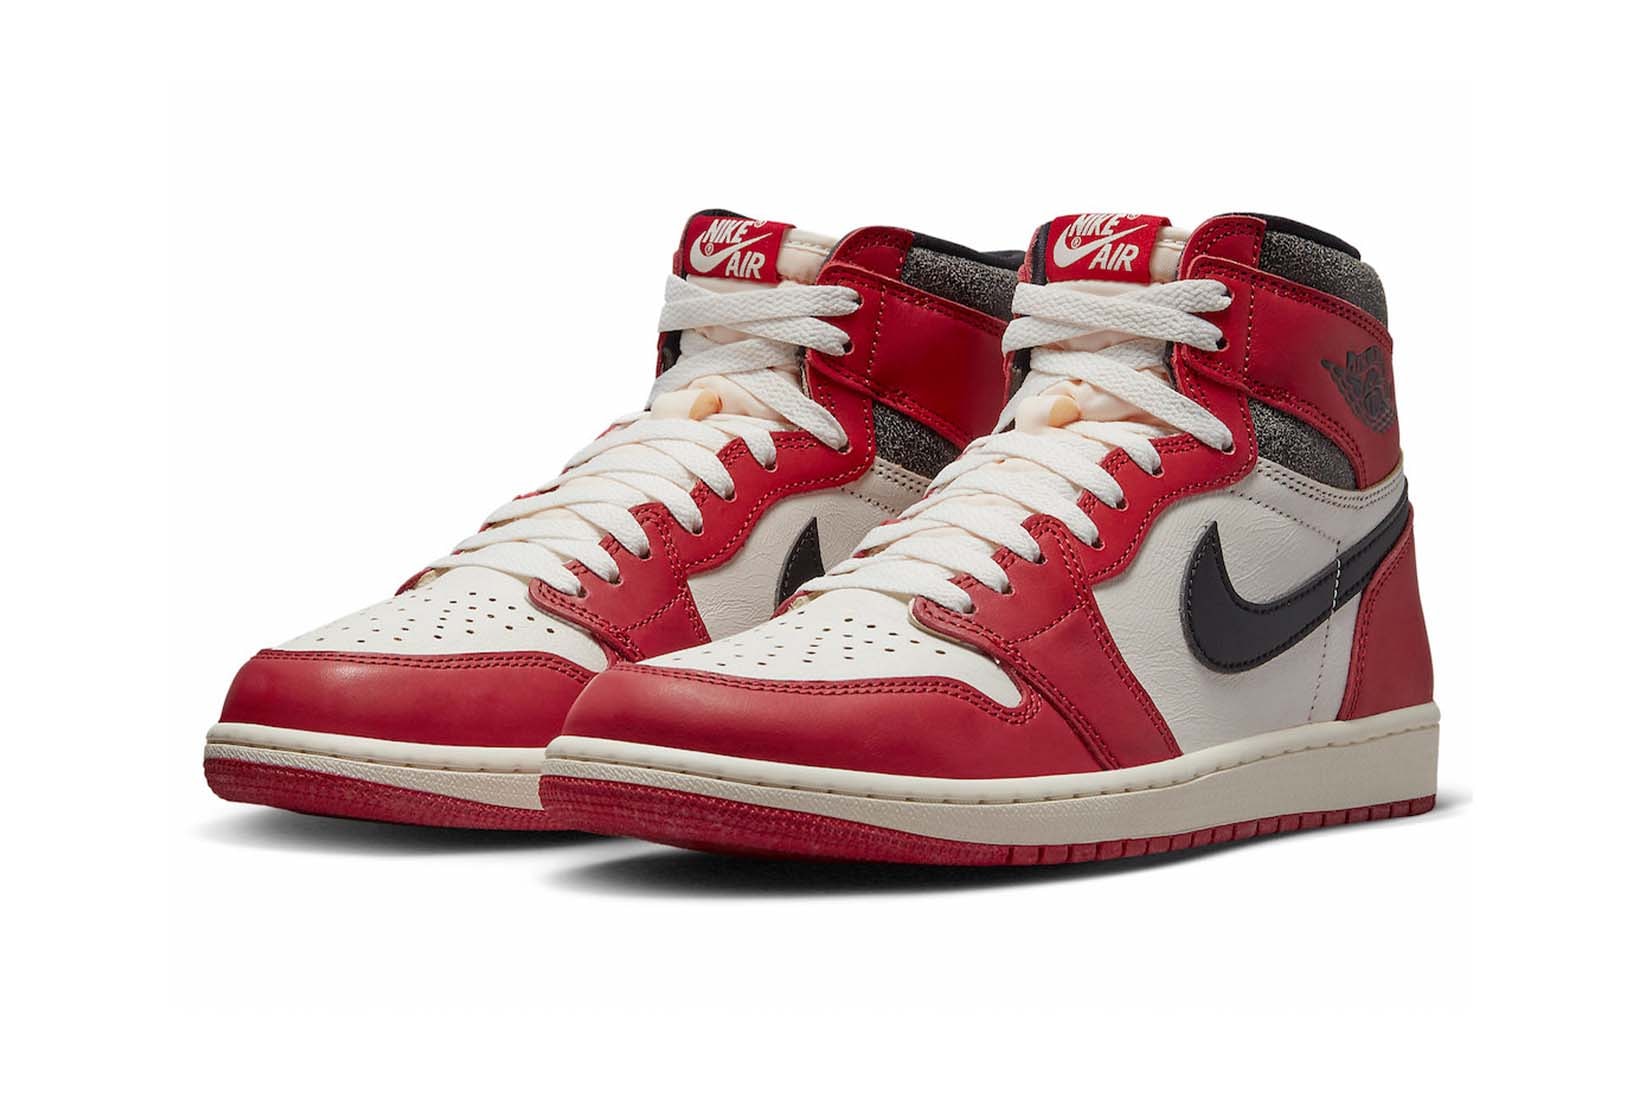 Nike Air Jordan 1 High Lost and Found Chicago Reimagined DZ5485-612 Release Date Price